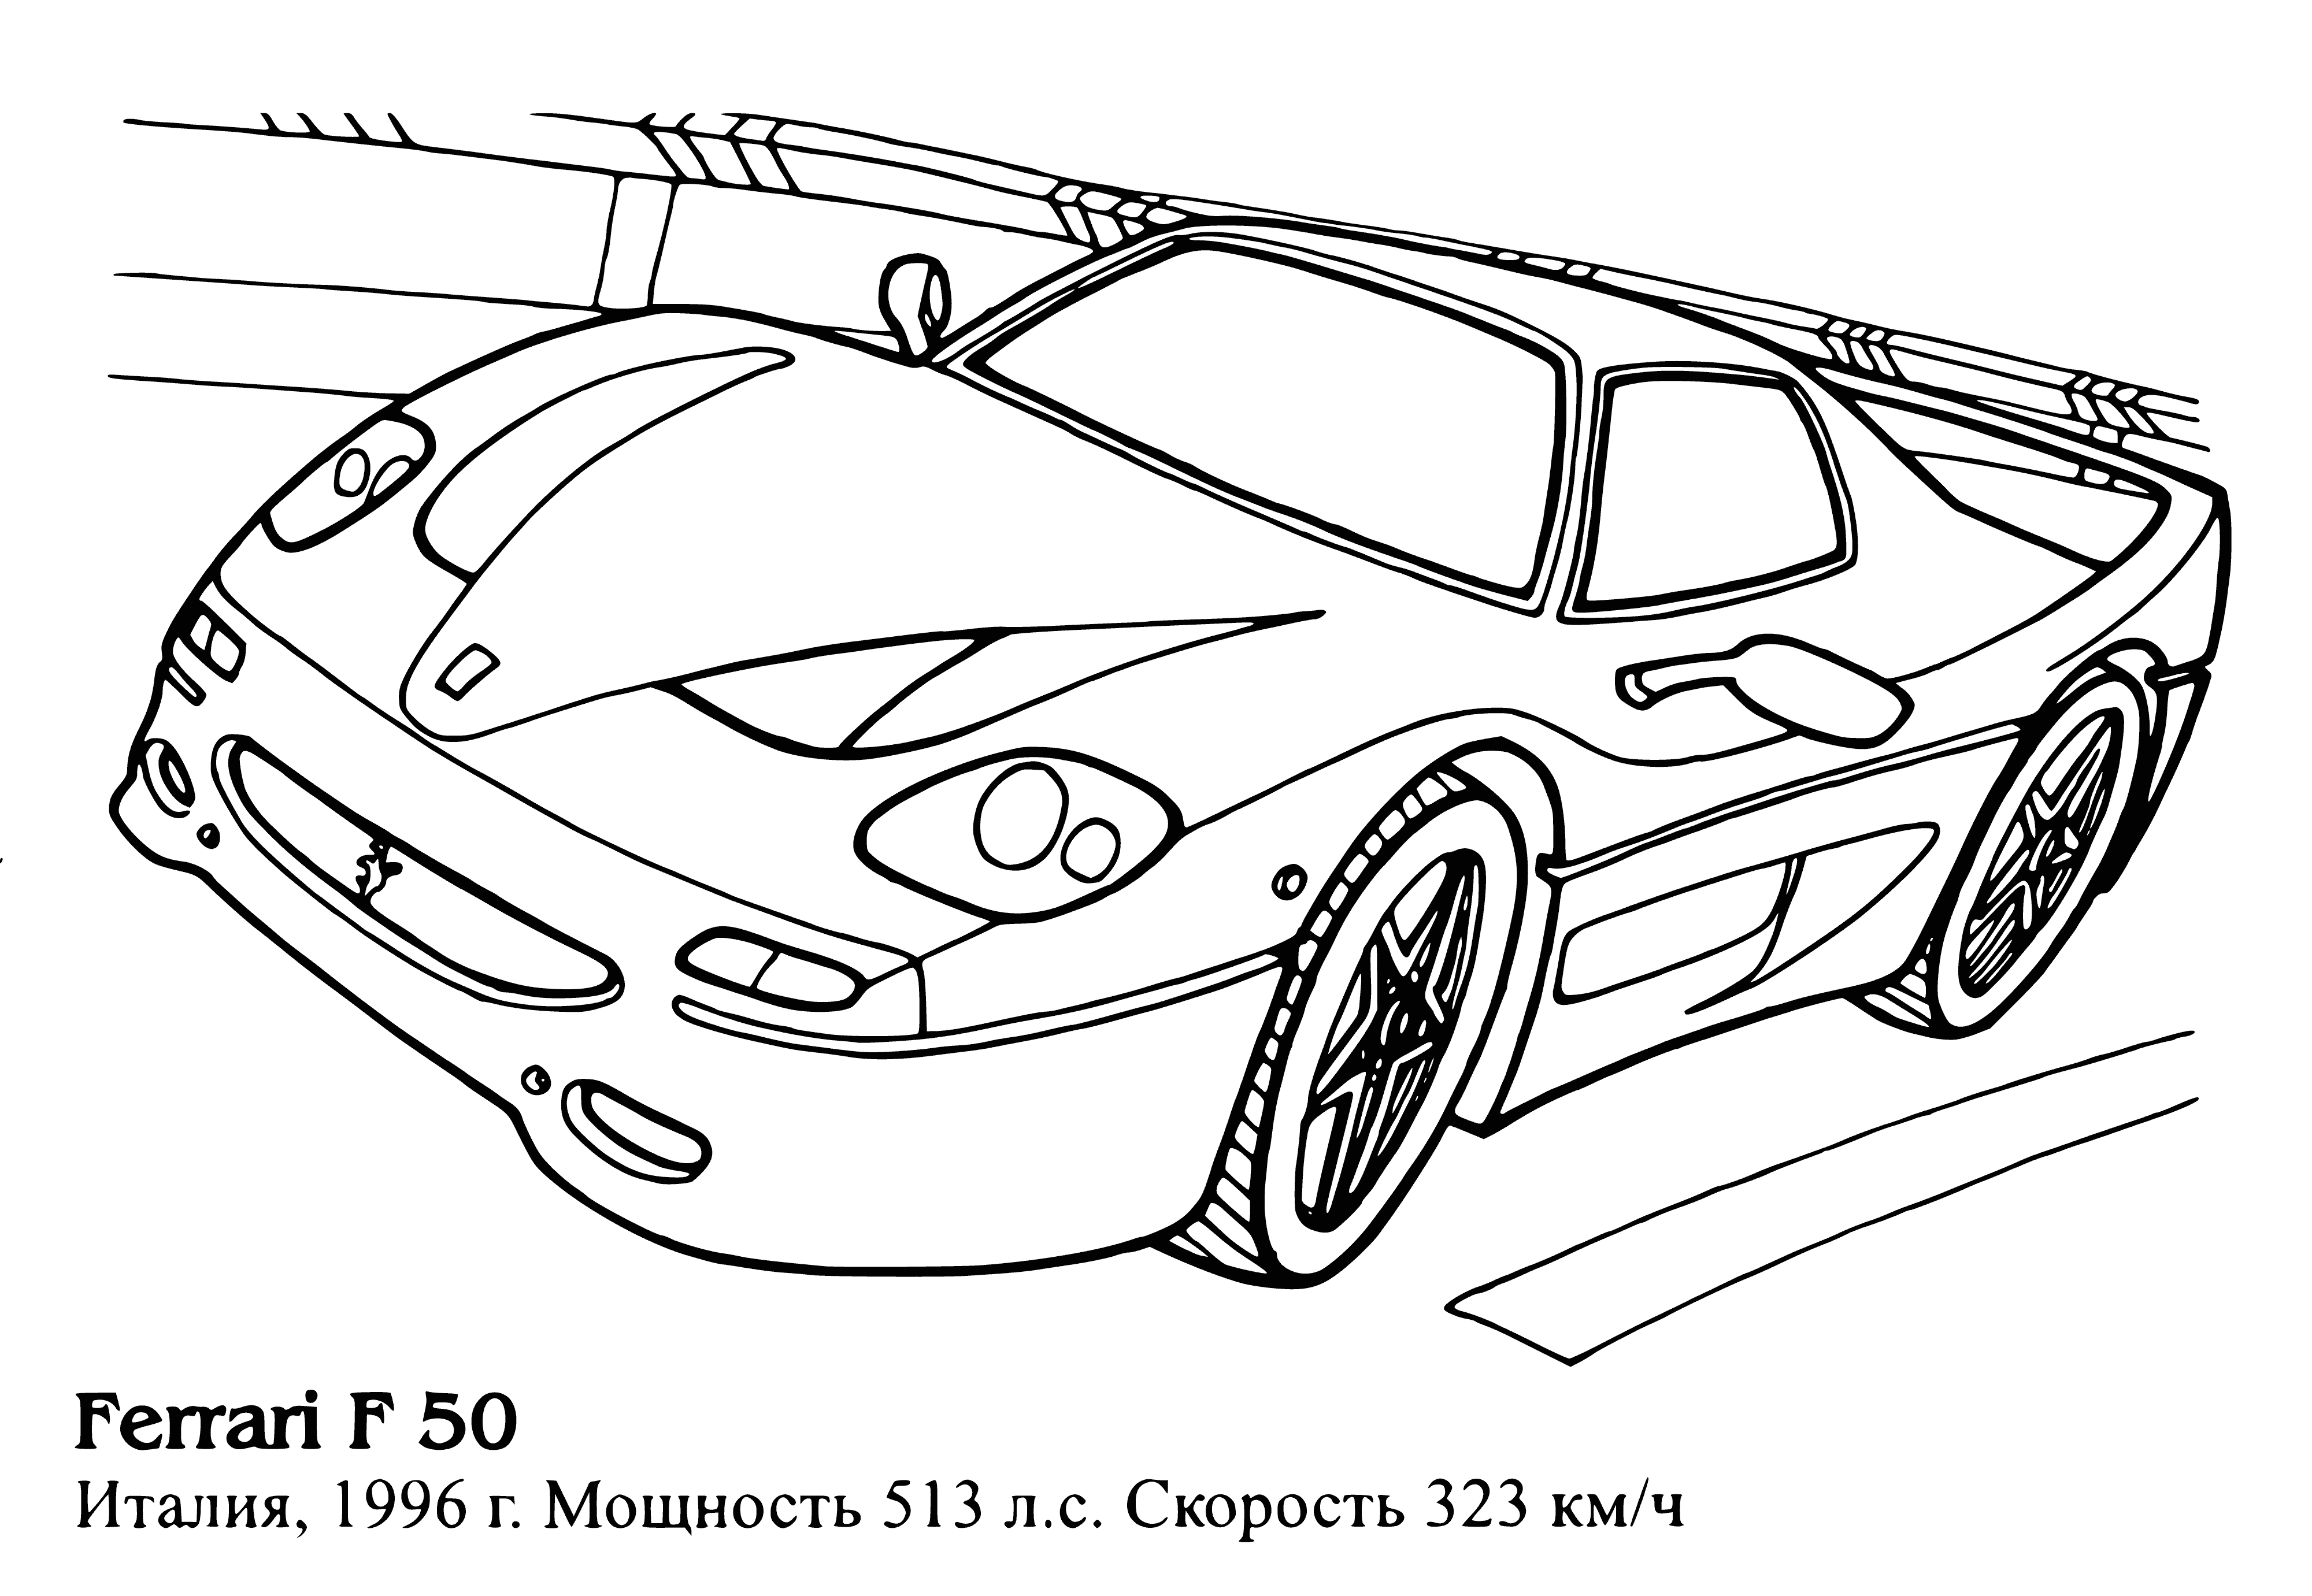 coloring page: Ferrari celebrates 50th anniversary with their F50: V12 engine that produces 520PS, 0-100 km/h in 3.7 sec, max speed of 324 km/h, 1,170 kg kerb weight. 349 cars were produced, each costing US$520,000.